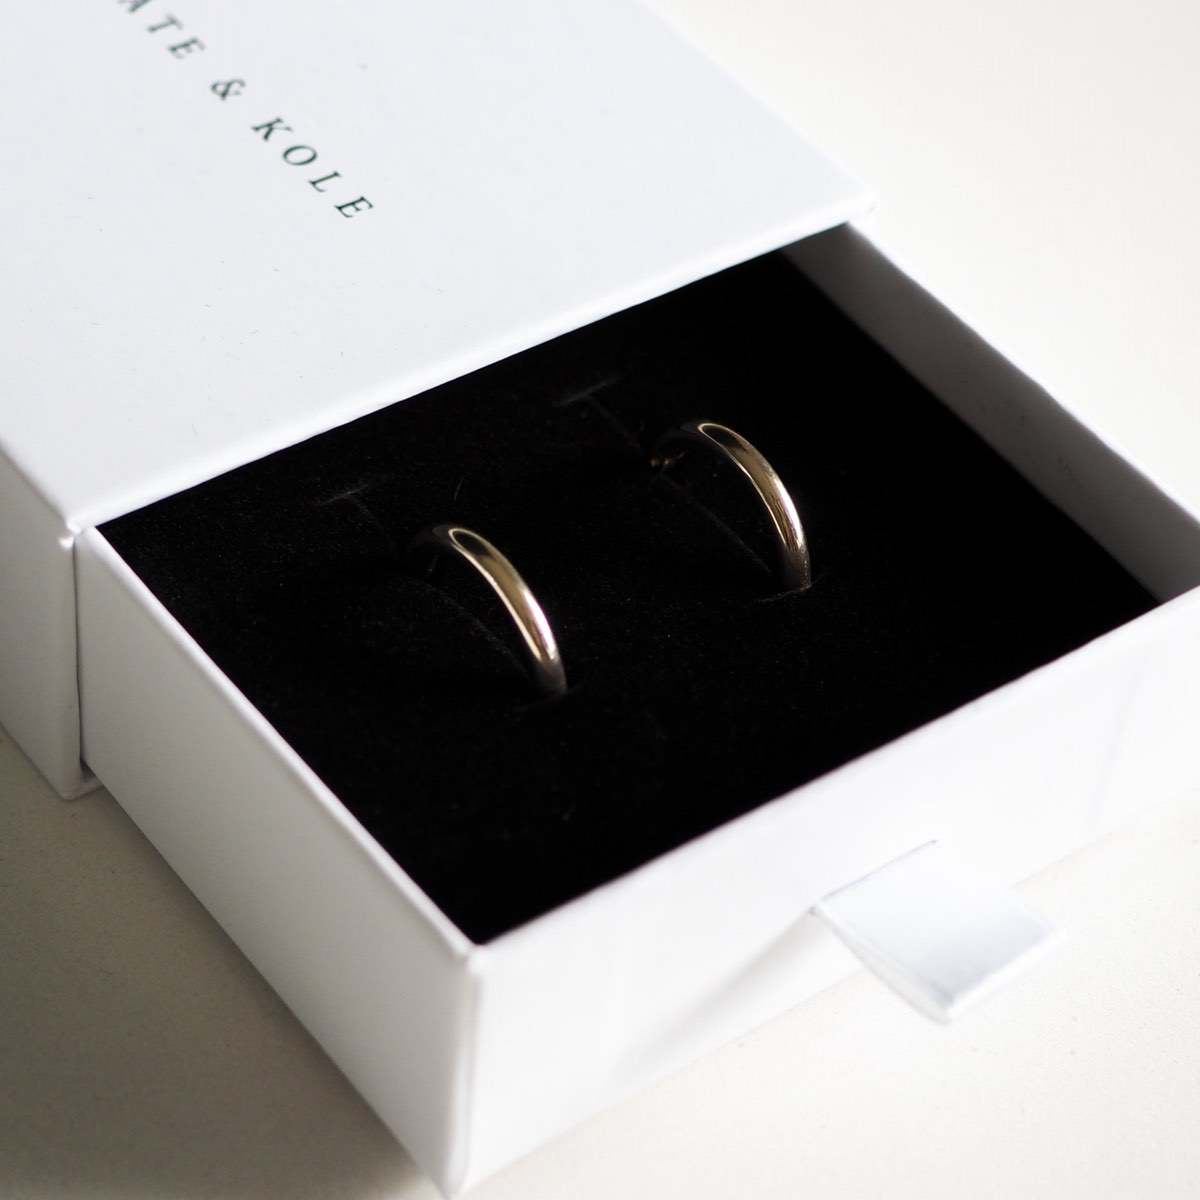 Our solid 9ct yellow gold small round huggies sitting perfectly in our Kate & Kole jewellery box